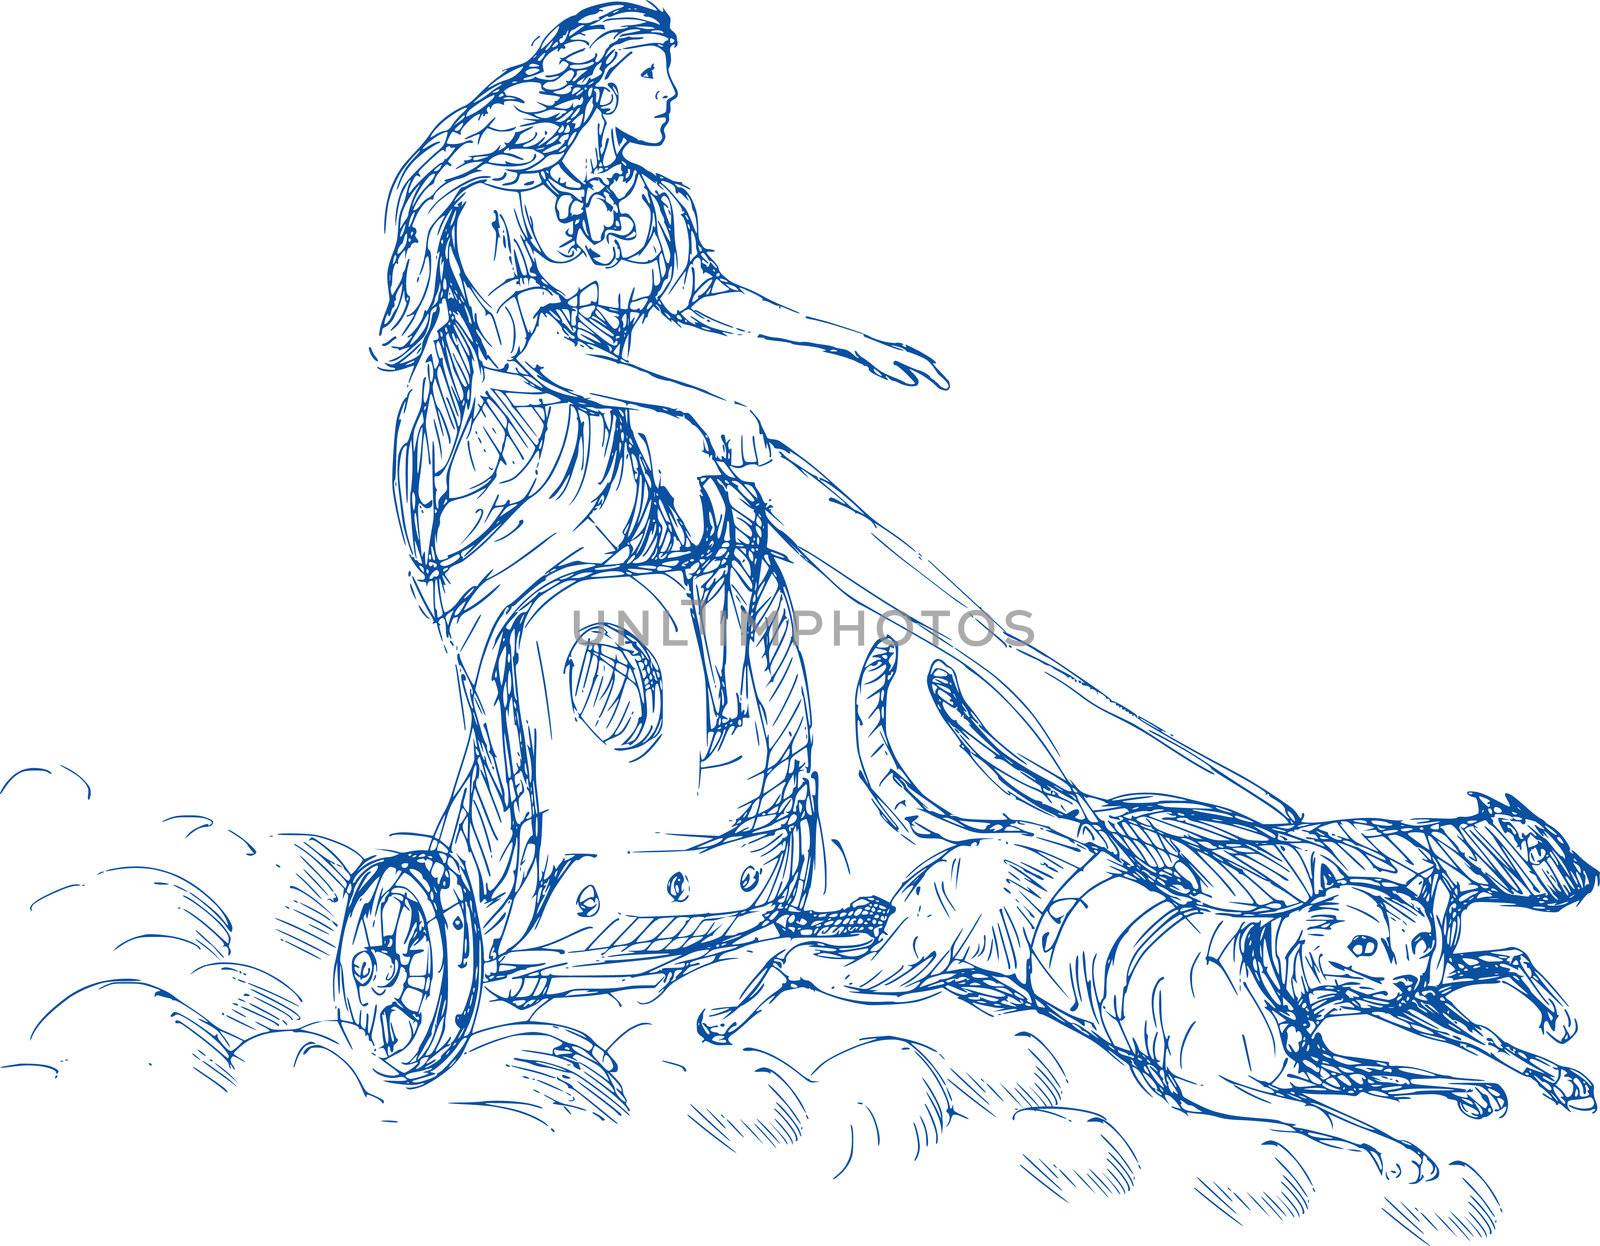 Illustration of Freya Norse goddess of love and beauty riding a chariot being pulled by two cats